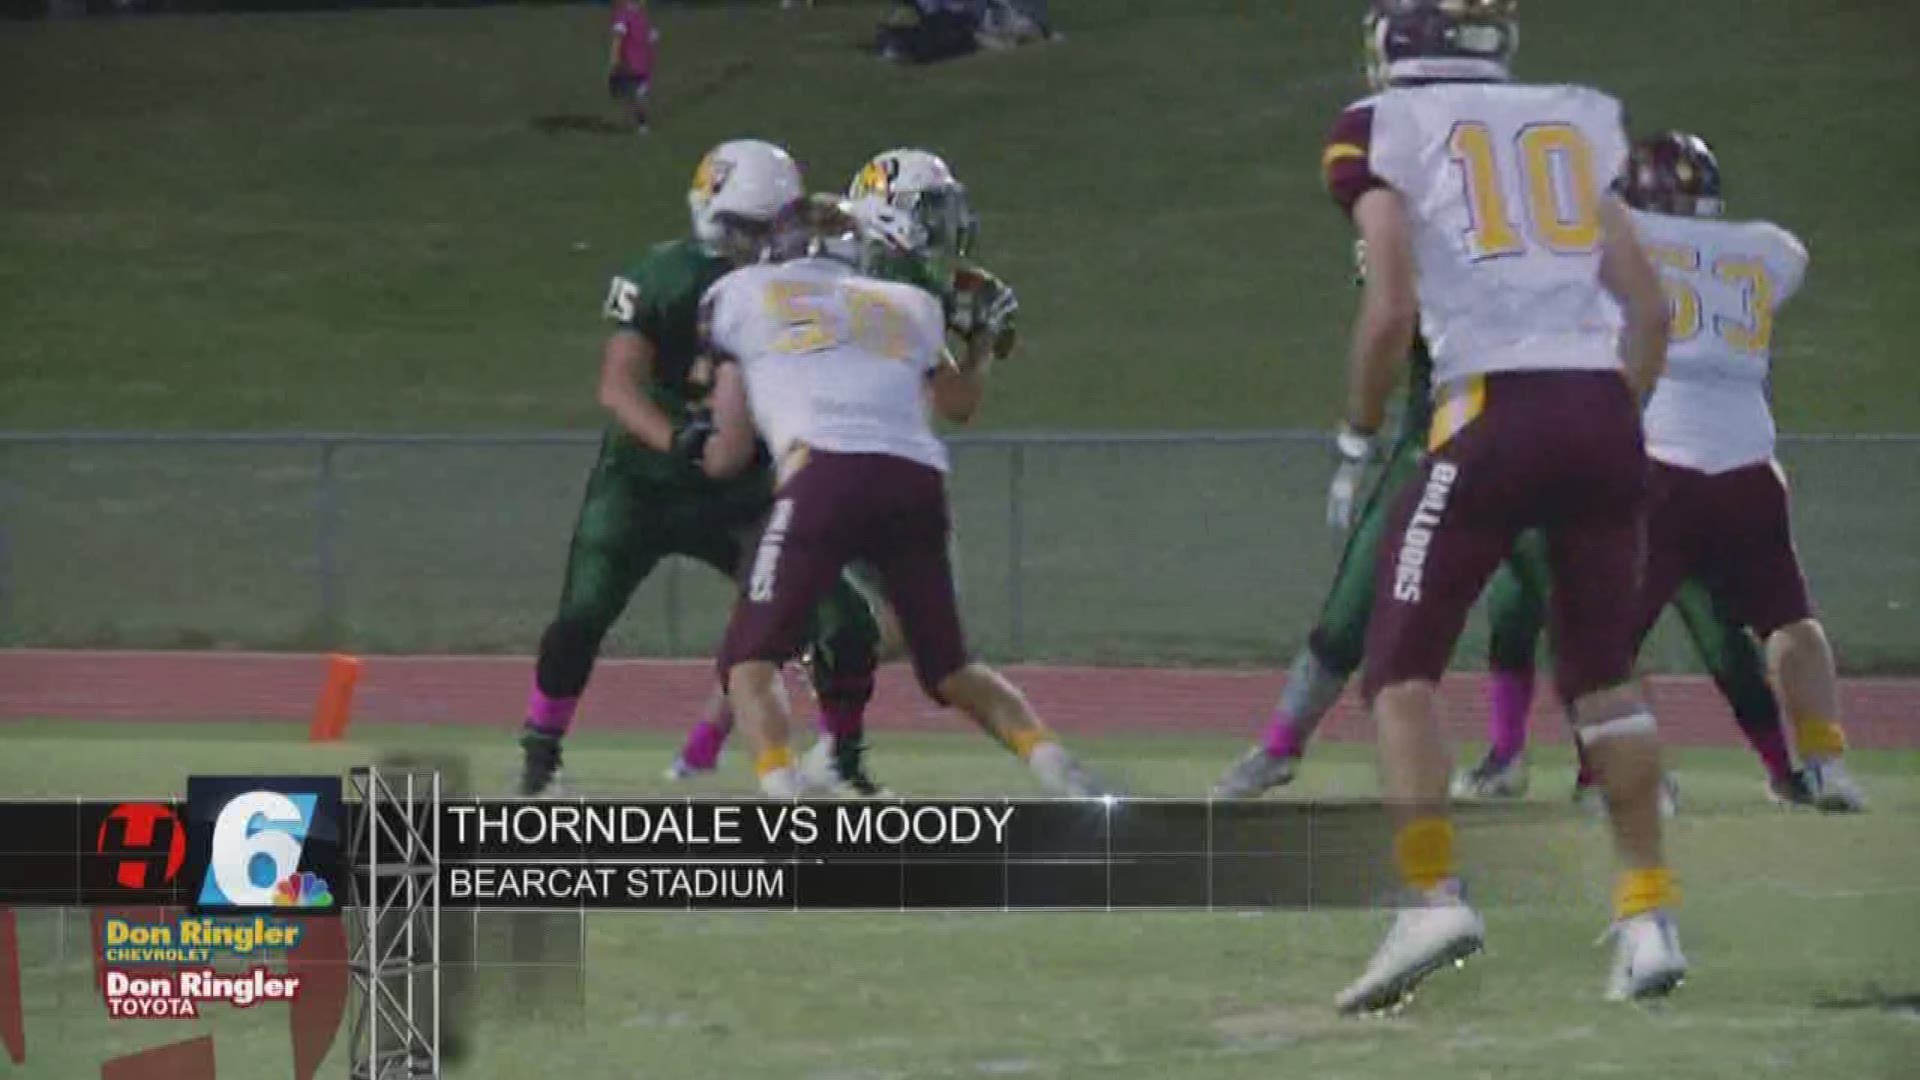 Thorndale vs Moody highlights